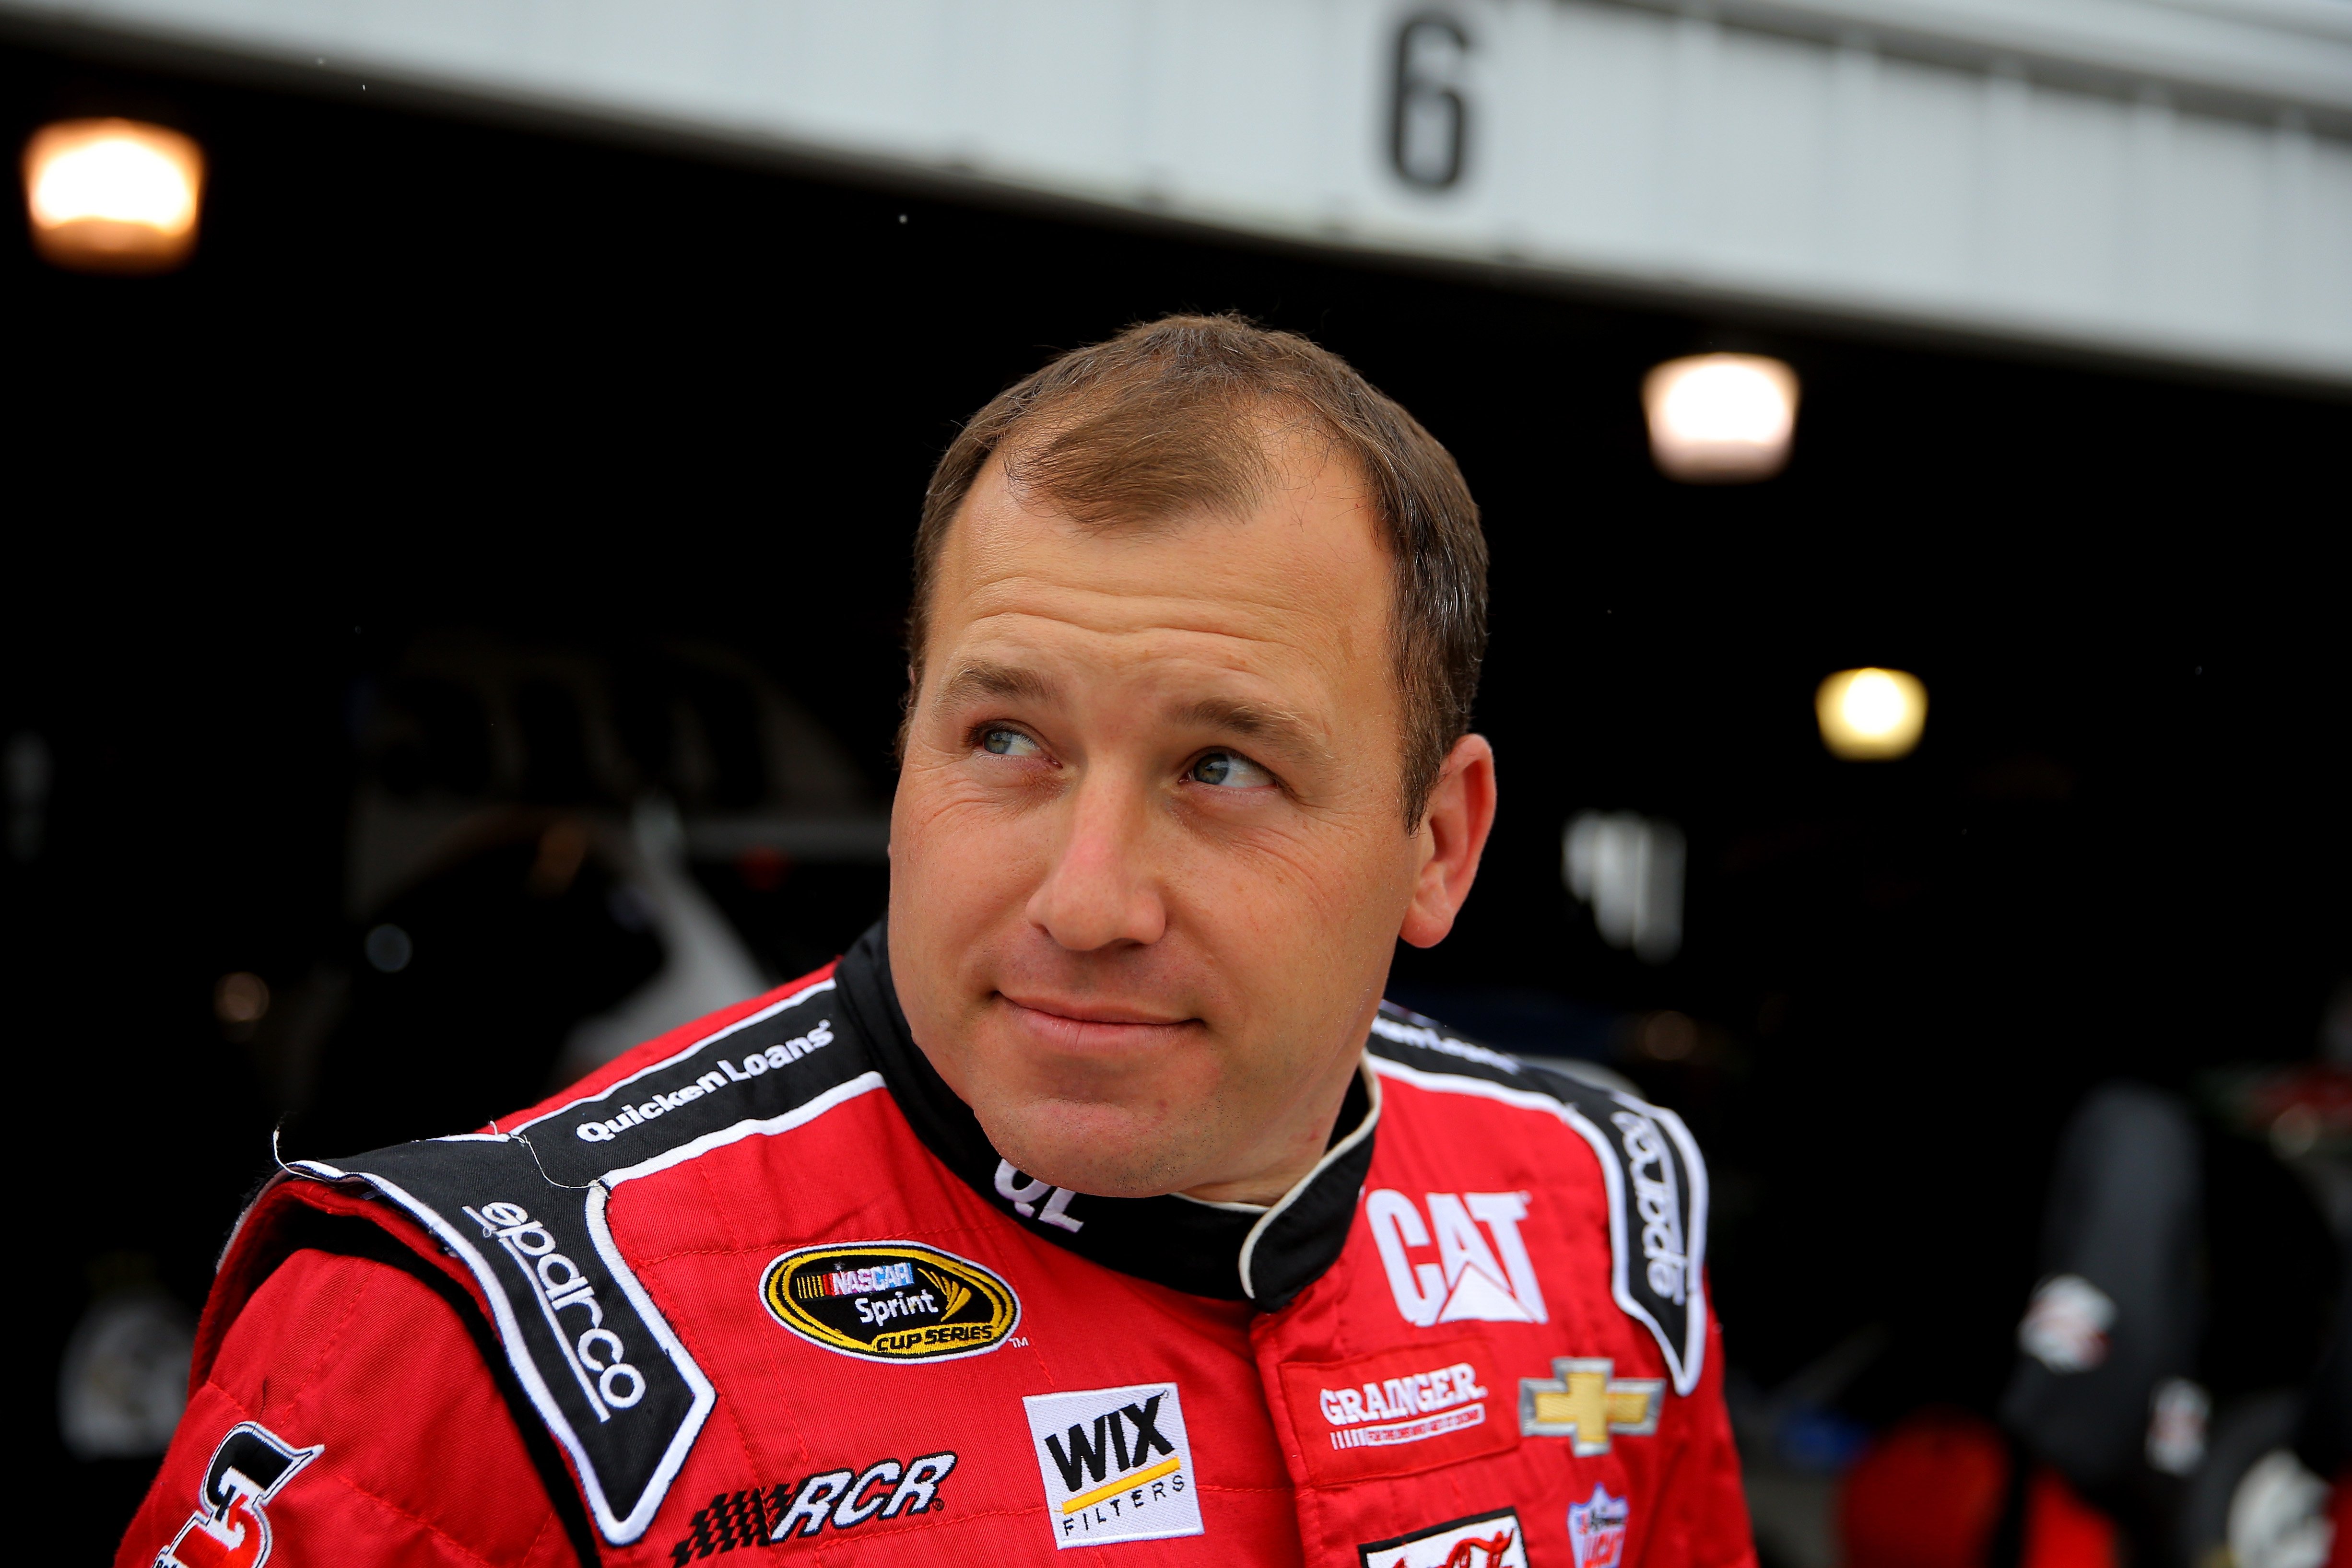 Ryan Newman during practice for the NASCAR Sprint Cup Series STP 500 on March 27, 2015, in Martinsville, Virginia. | Source: Getty Images.